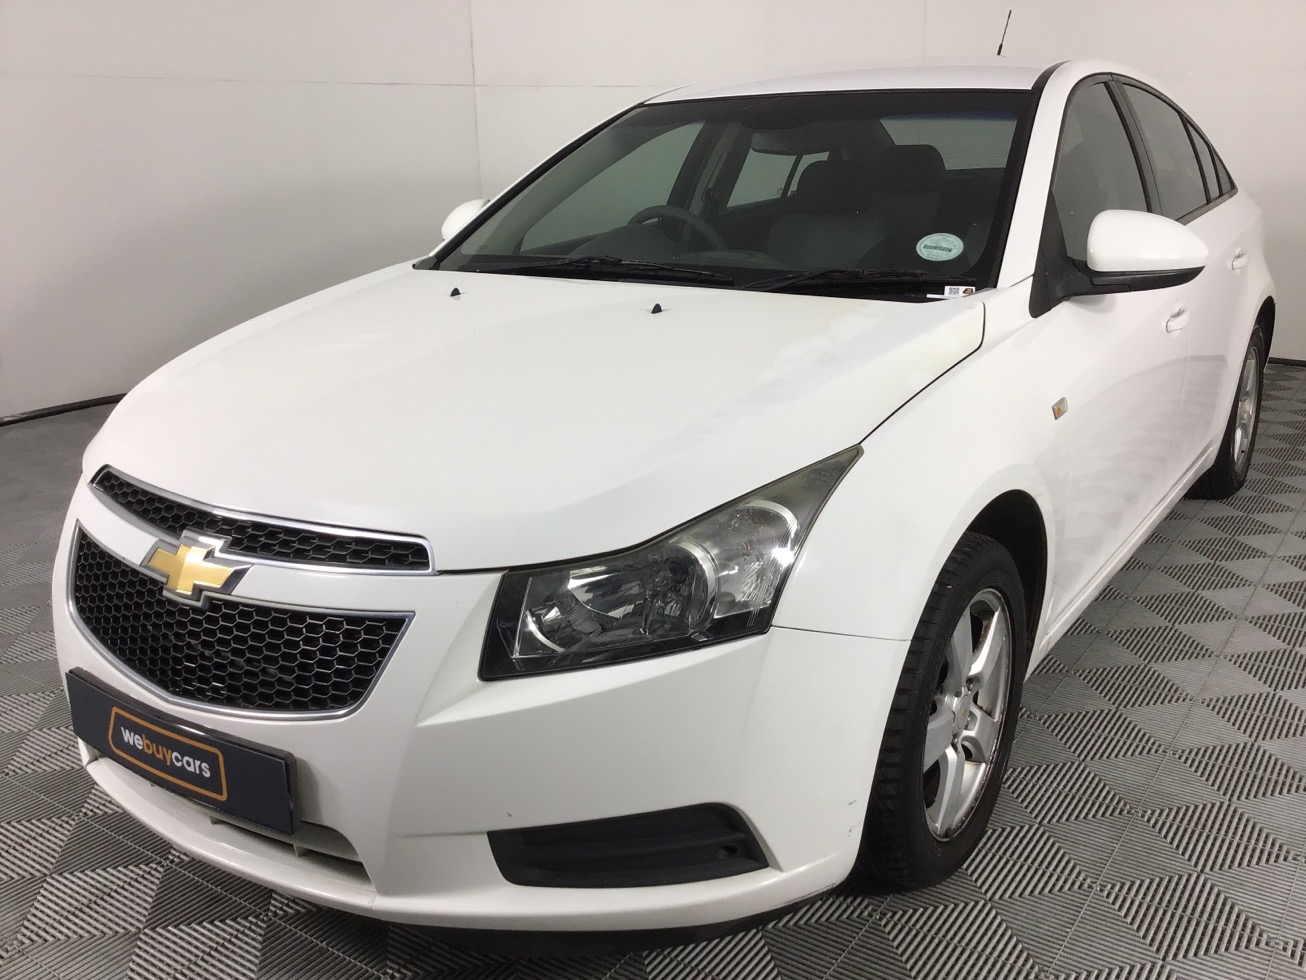 Used 2010 Chevrolet Cruze 1.6 L for sale WeBuyCars